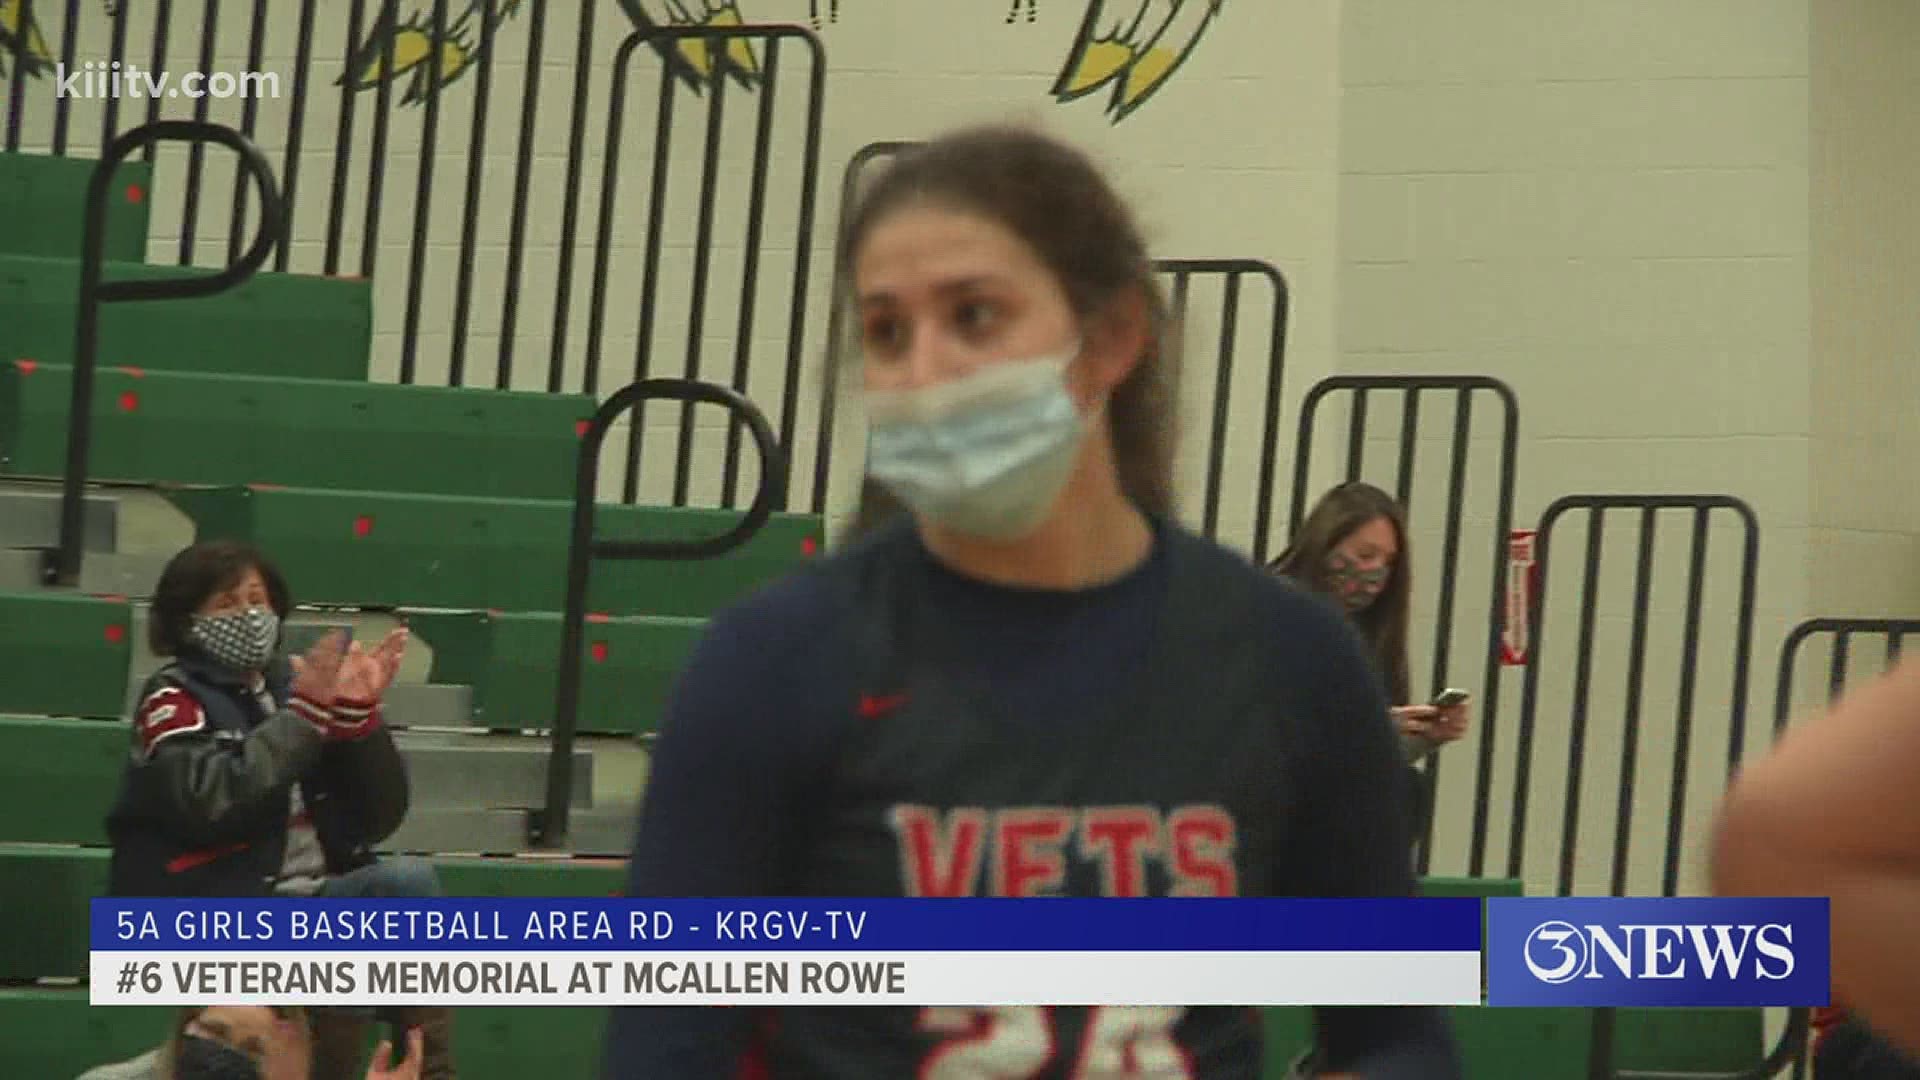 The Lady Eagles topped Rowe 67-27 to advance to the region quarterfinals. Highlights courtesy KRGV.